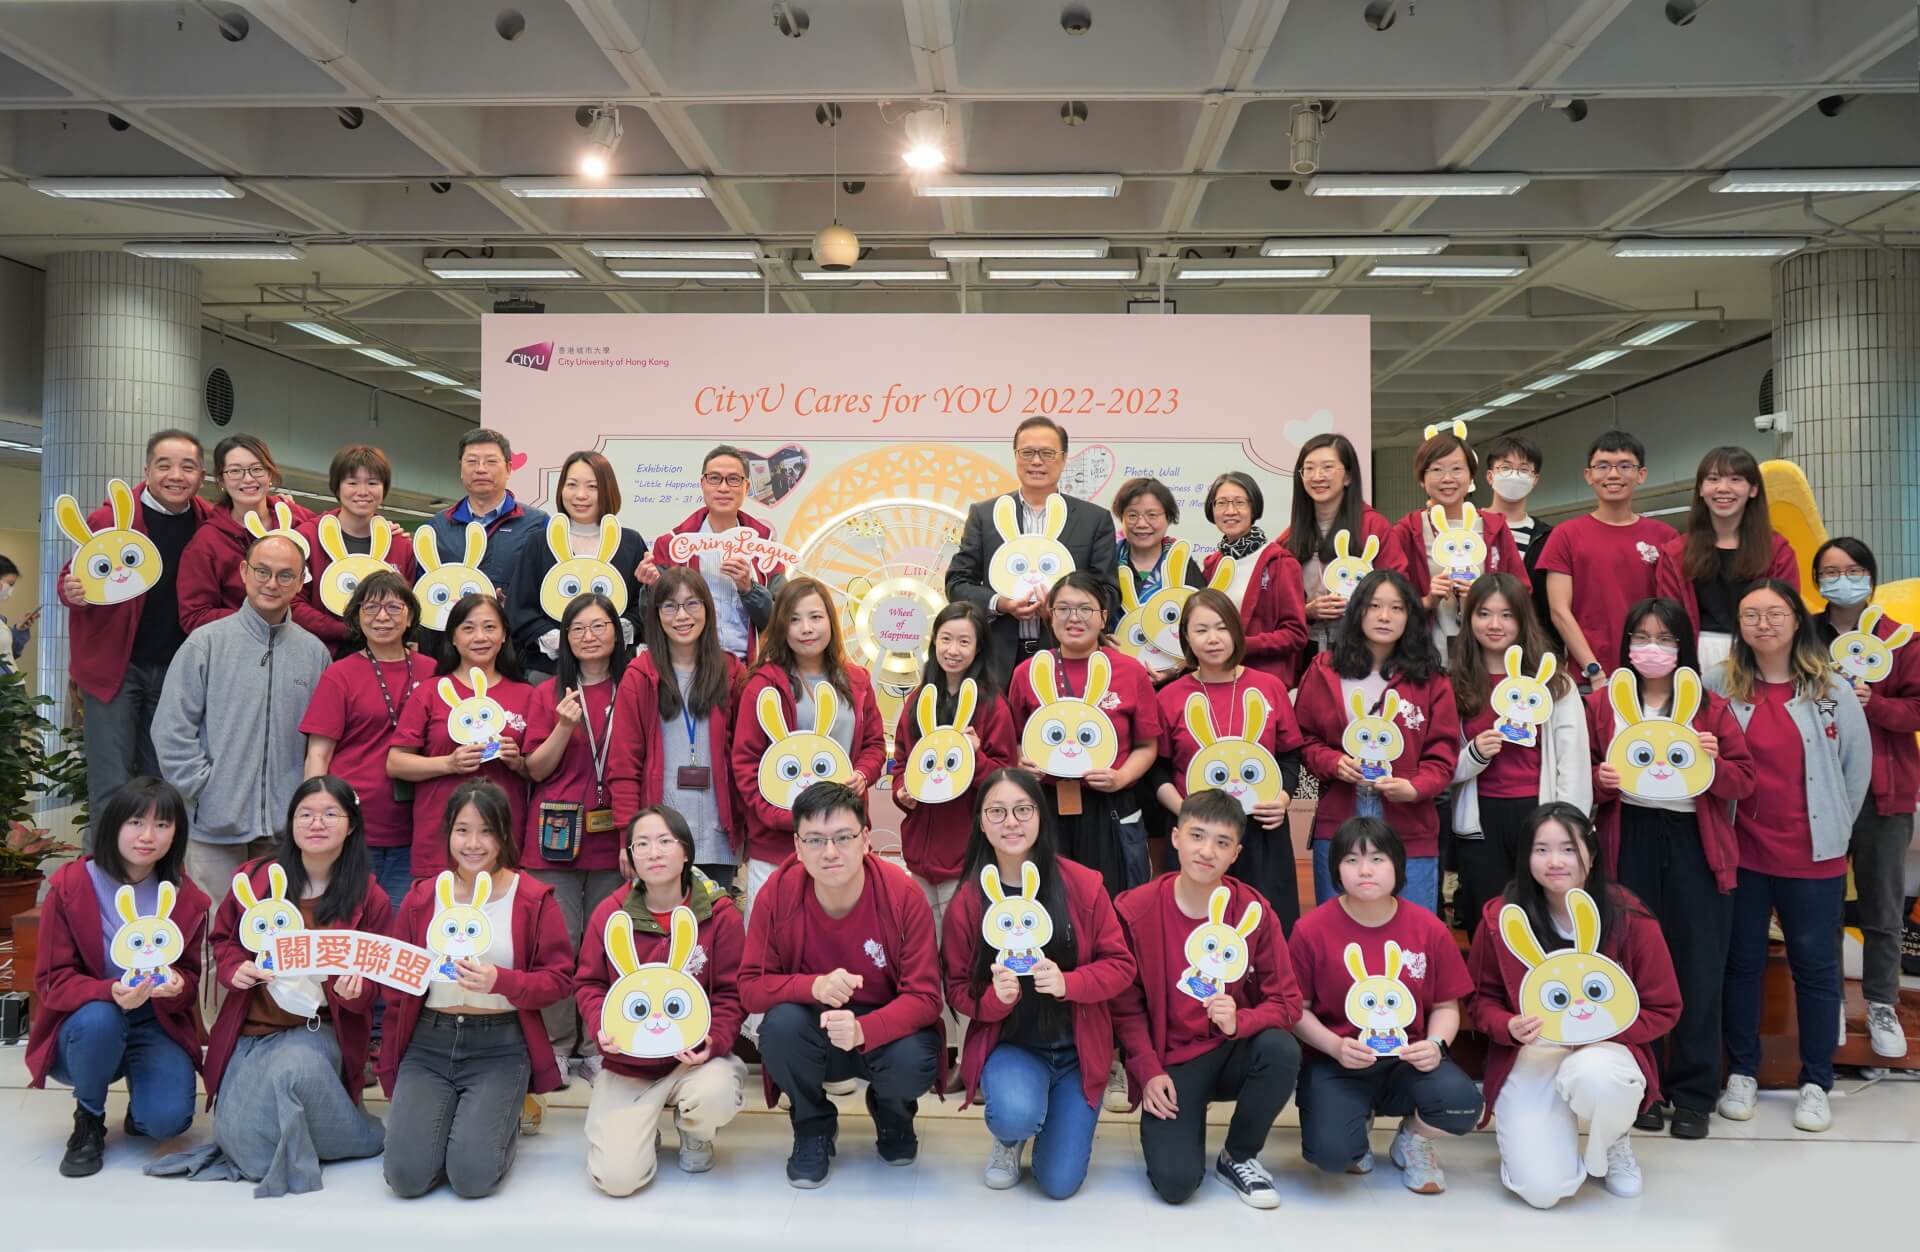 “<i>CityU Cares for YOU</i>” for Semester B 2022-2023 was held from 28 to 31 March 2023.